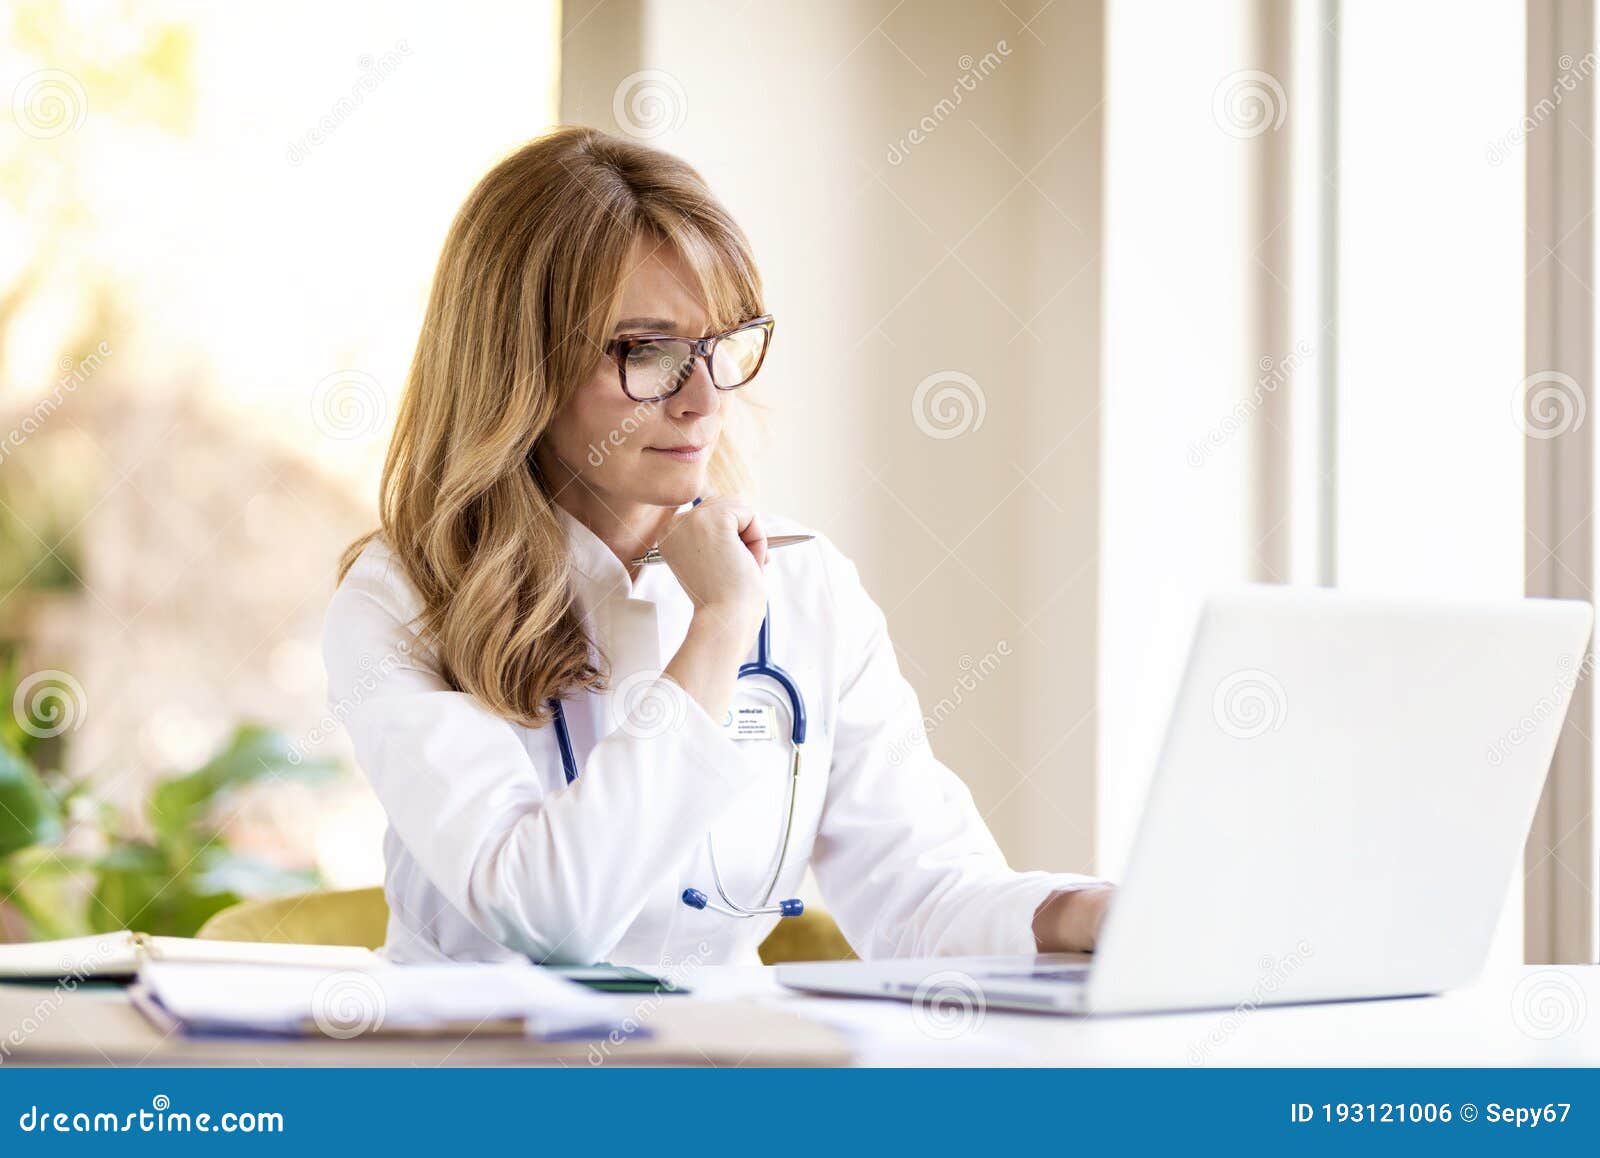 middle aged female doctor working on laptop in doctor`s room